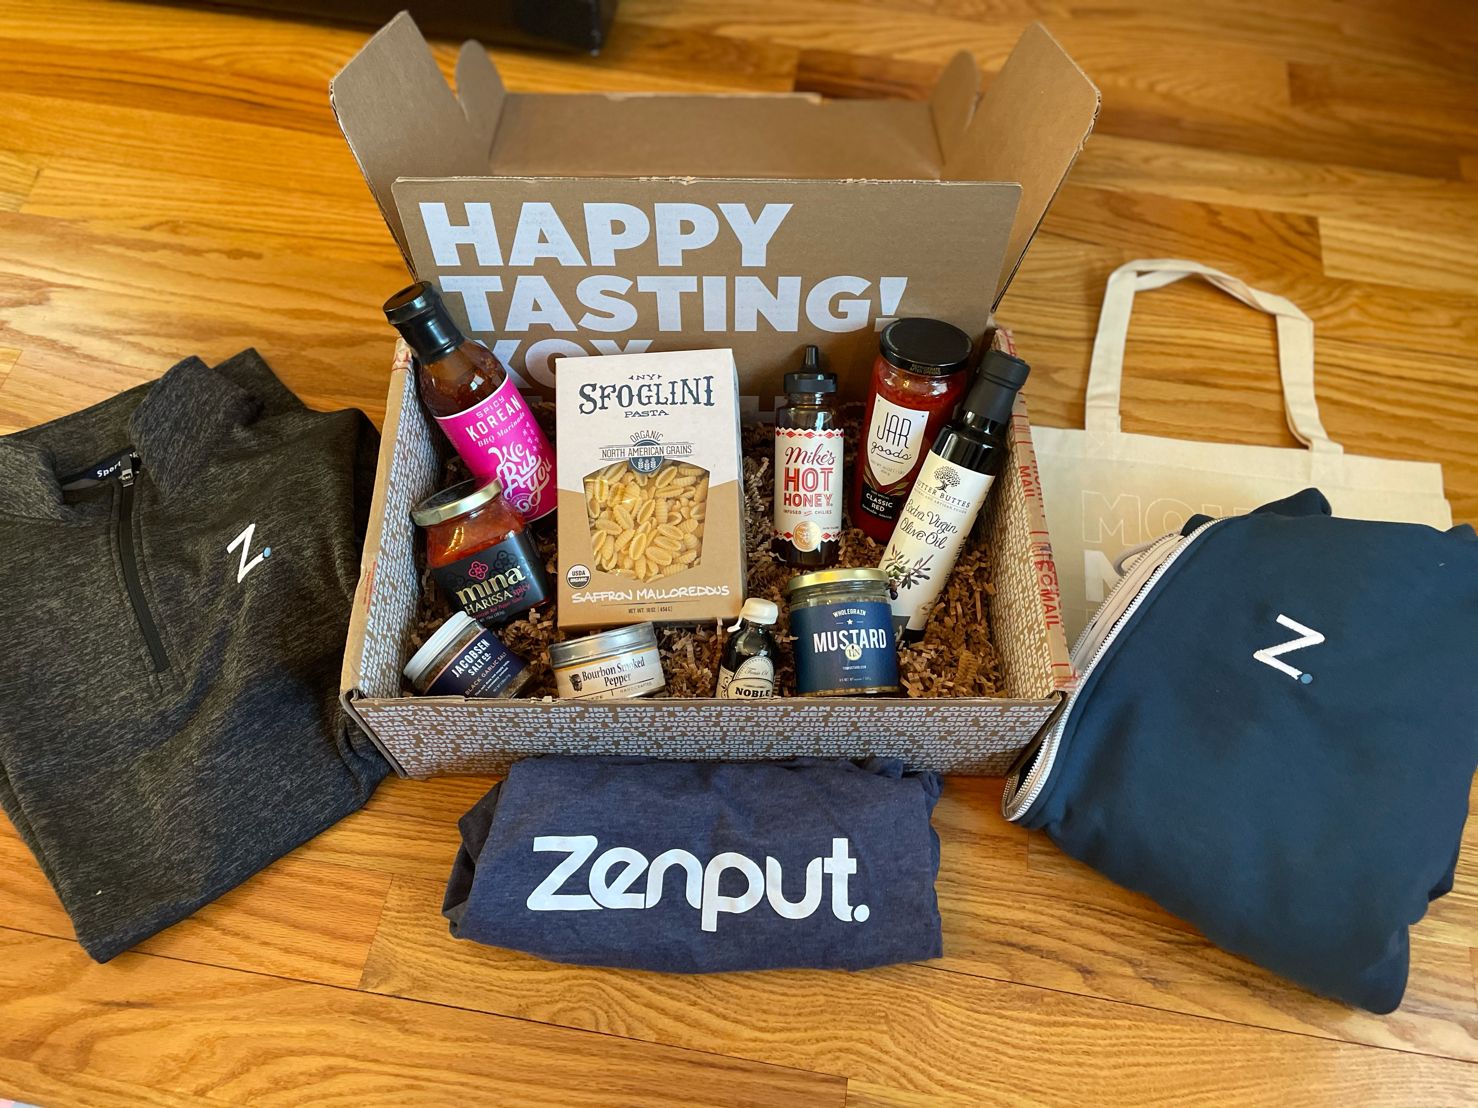 zenput swag and mouth.com tasting box